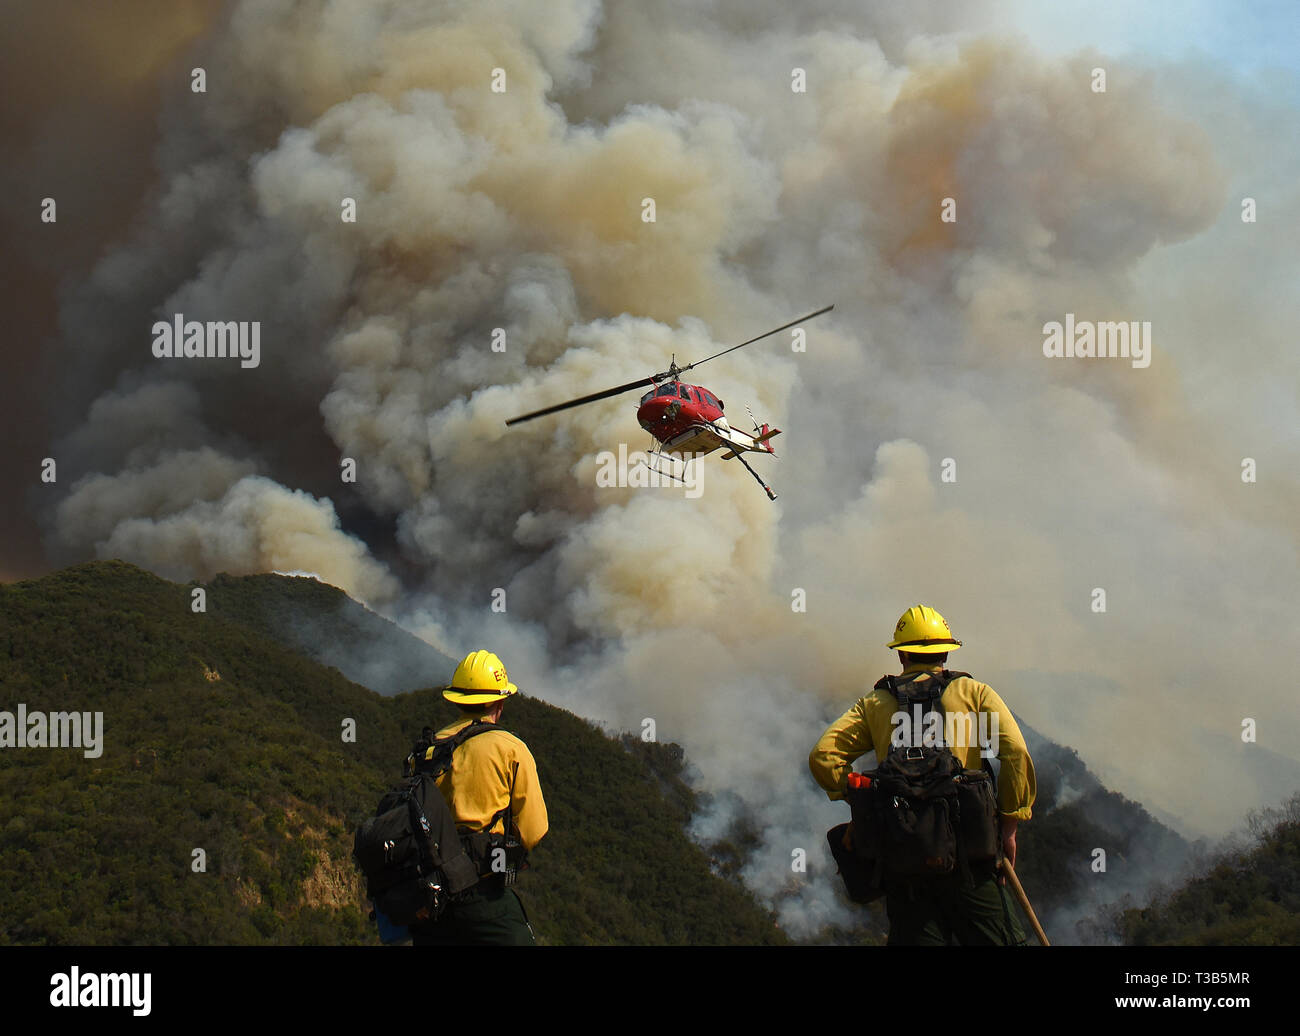 Santa Barbara, CA, USA. 11th July, 2017. US Forest Service Firefighters keep an eye on flames as a helicopter passes overhead after making a water drop on flames on the Whittier Fire in Santa Barbara County, Calif. Credit: Mike Eliason/ZUMA Wire/Alamy Live News Stock Photo